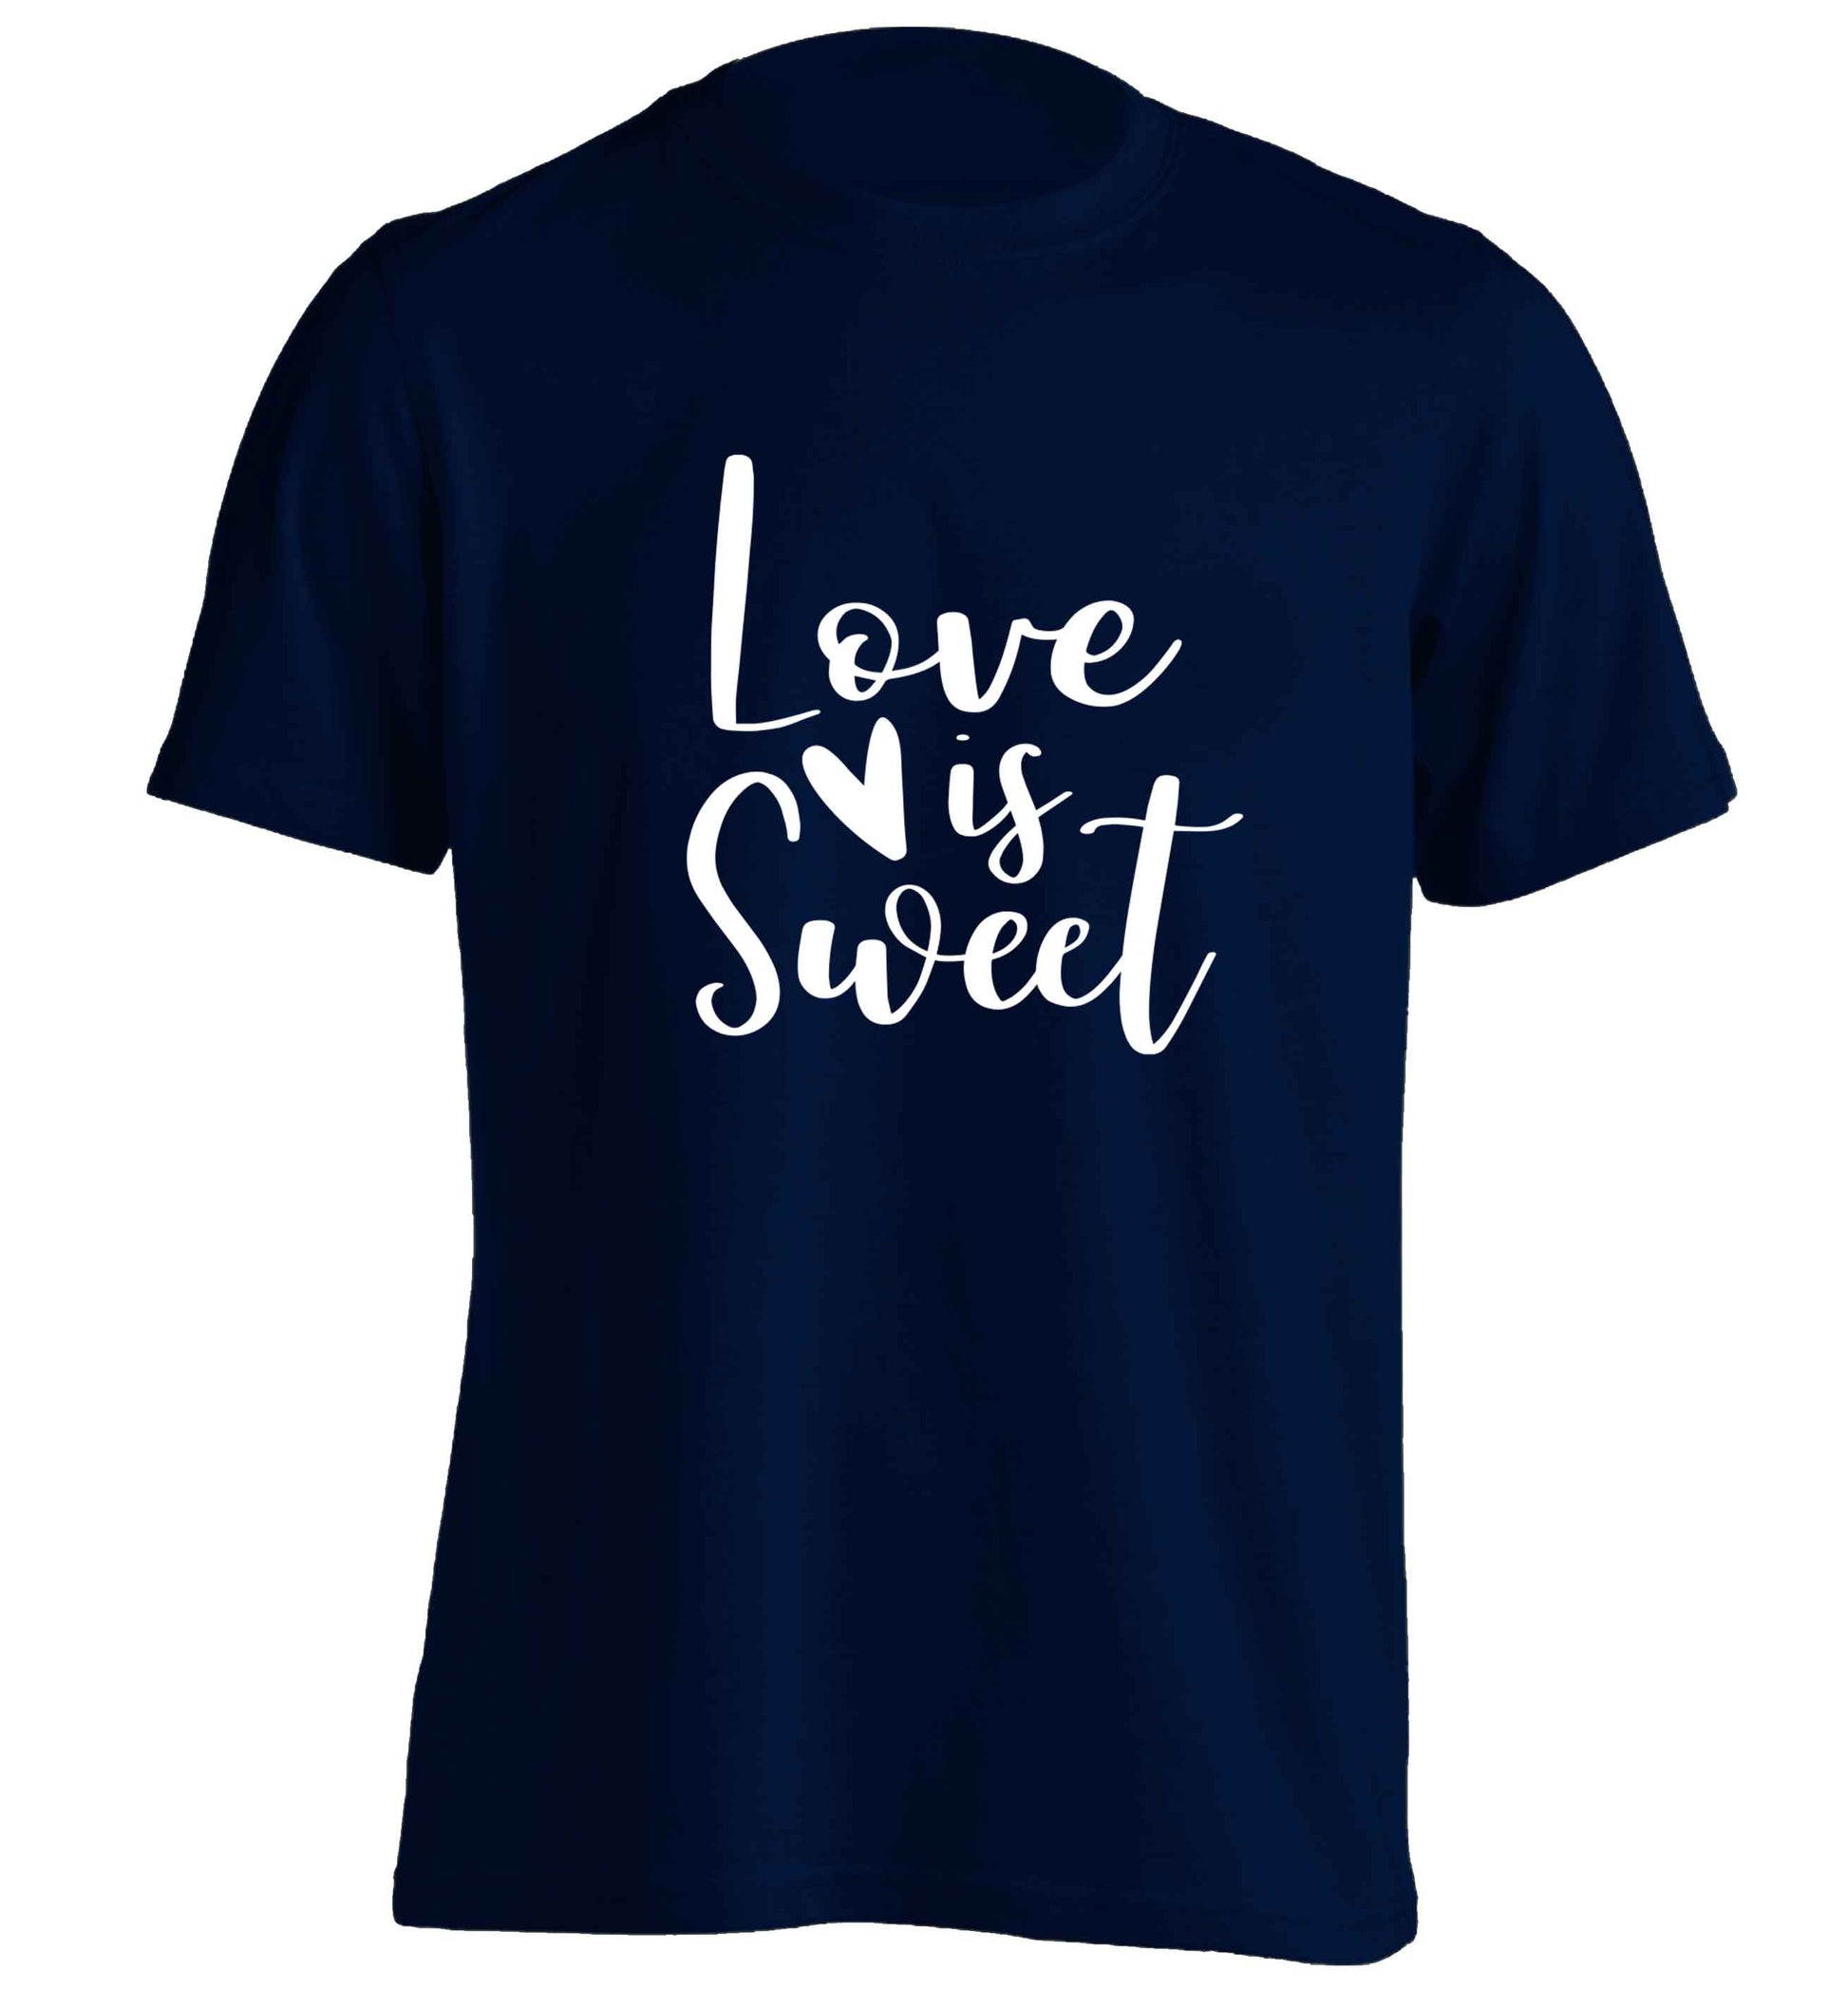 Love really does make the world go round! Ideal for weddings, valentines or just simply to show someone you love them!  adults unisex navy Tshirt 2XL